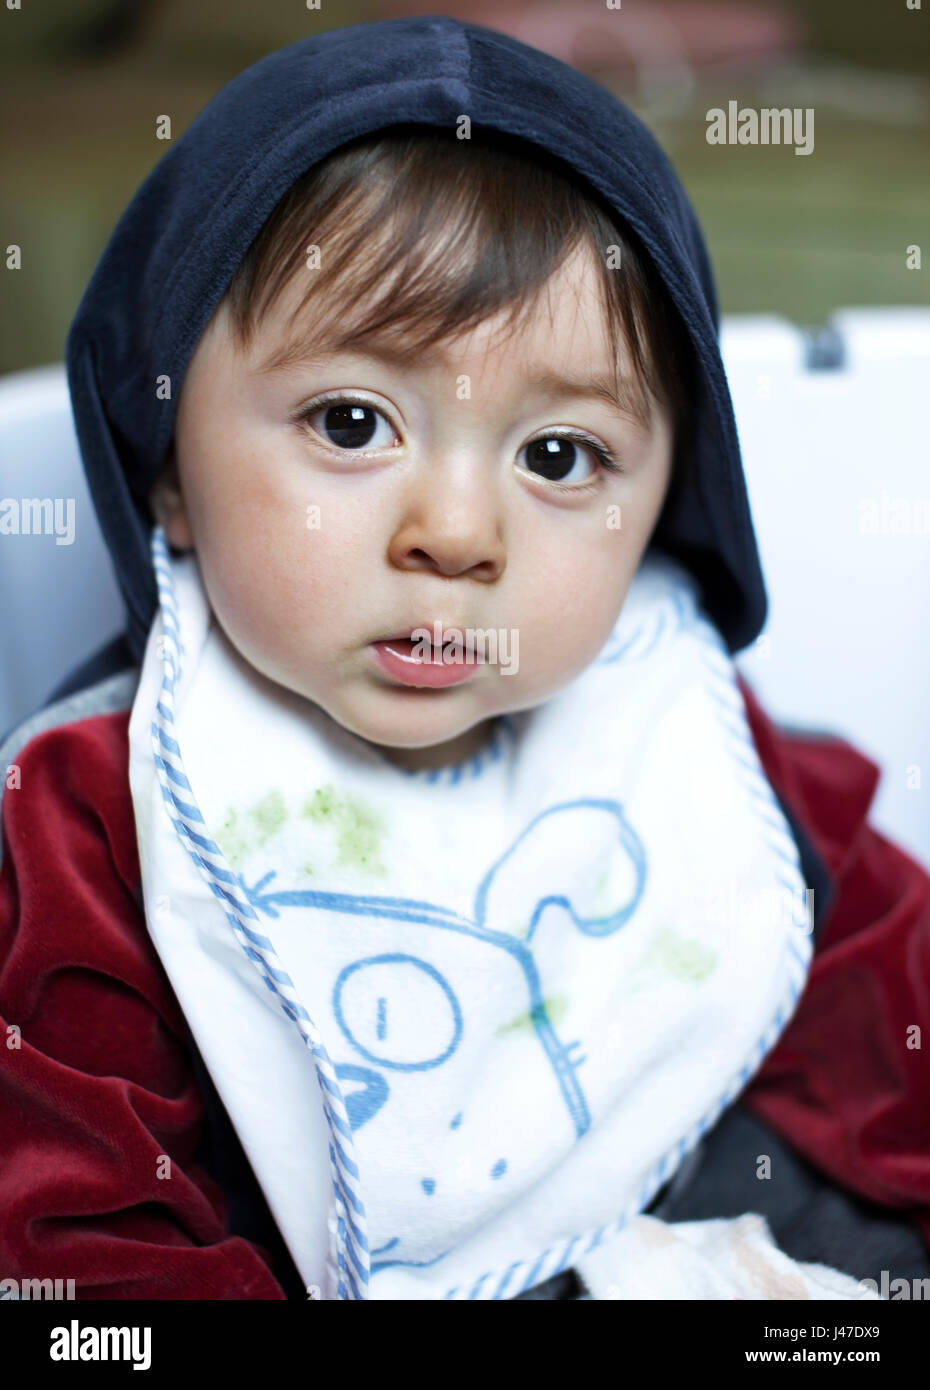 Portrait of sad serious multi-racial Asian Caucasian little boy with large brown eyes wearing a blue and maroon fleece jacket and white bib Stock Photo